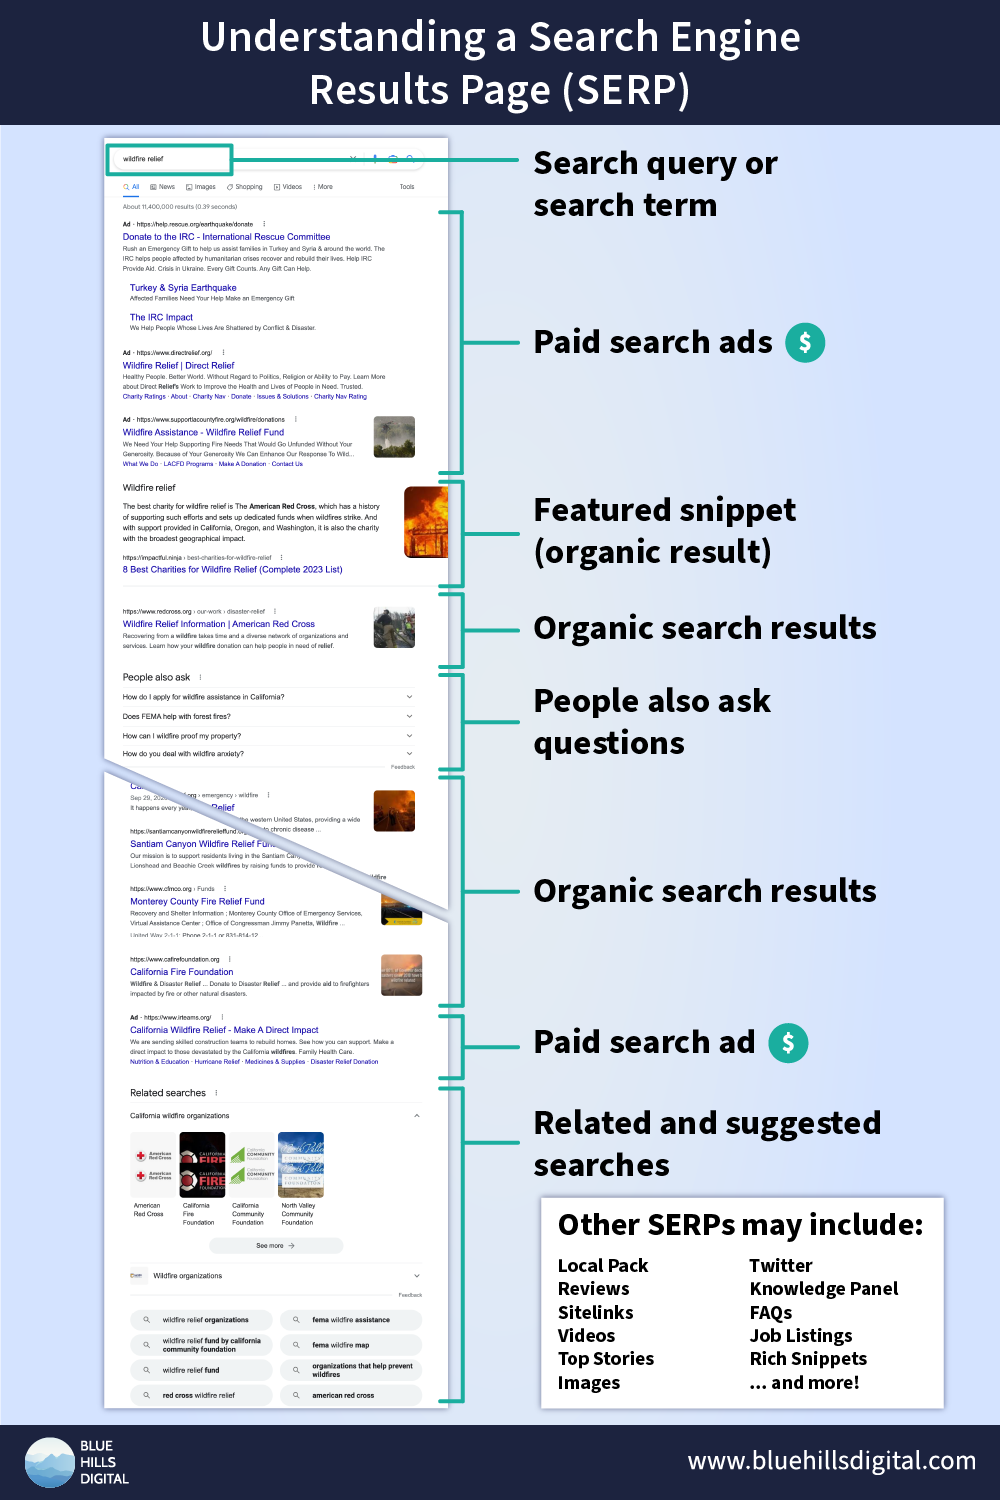 Understanding a Search Engine Results Page (SERP)